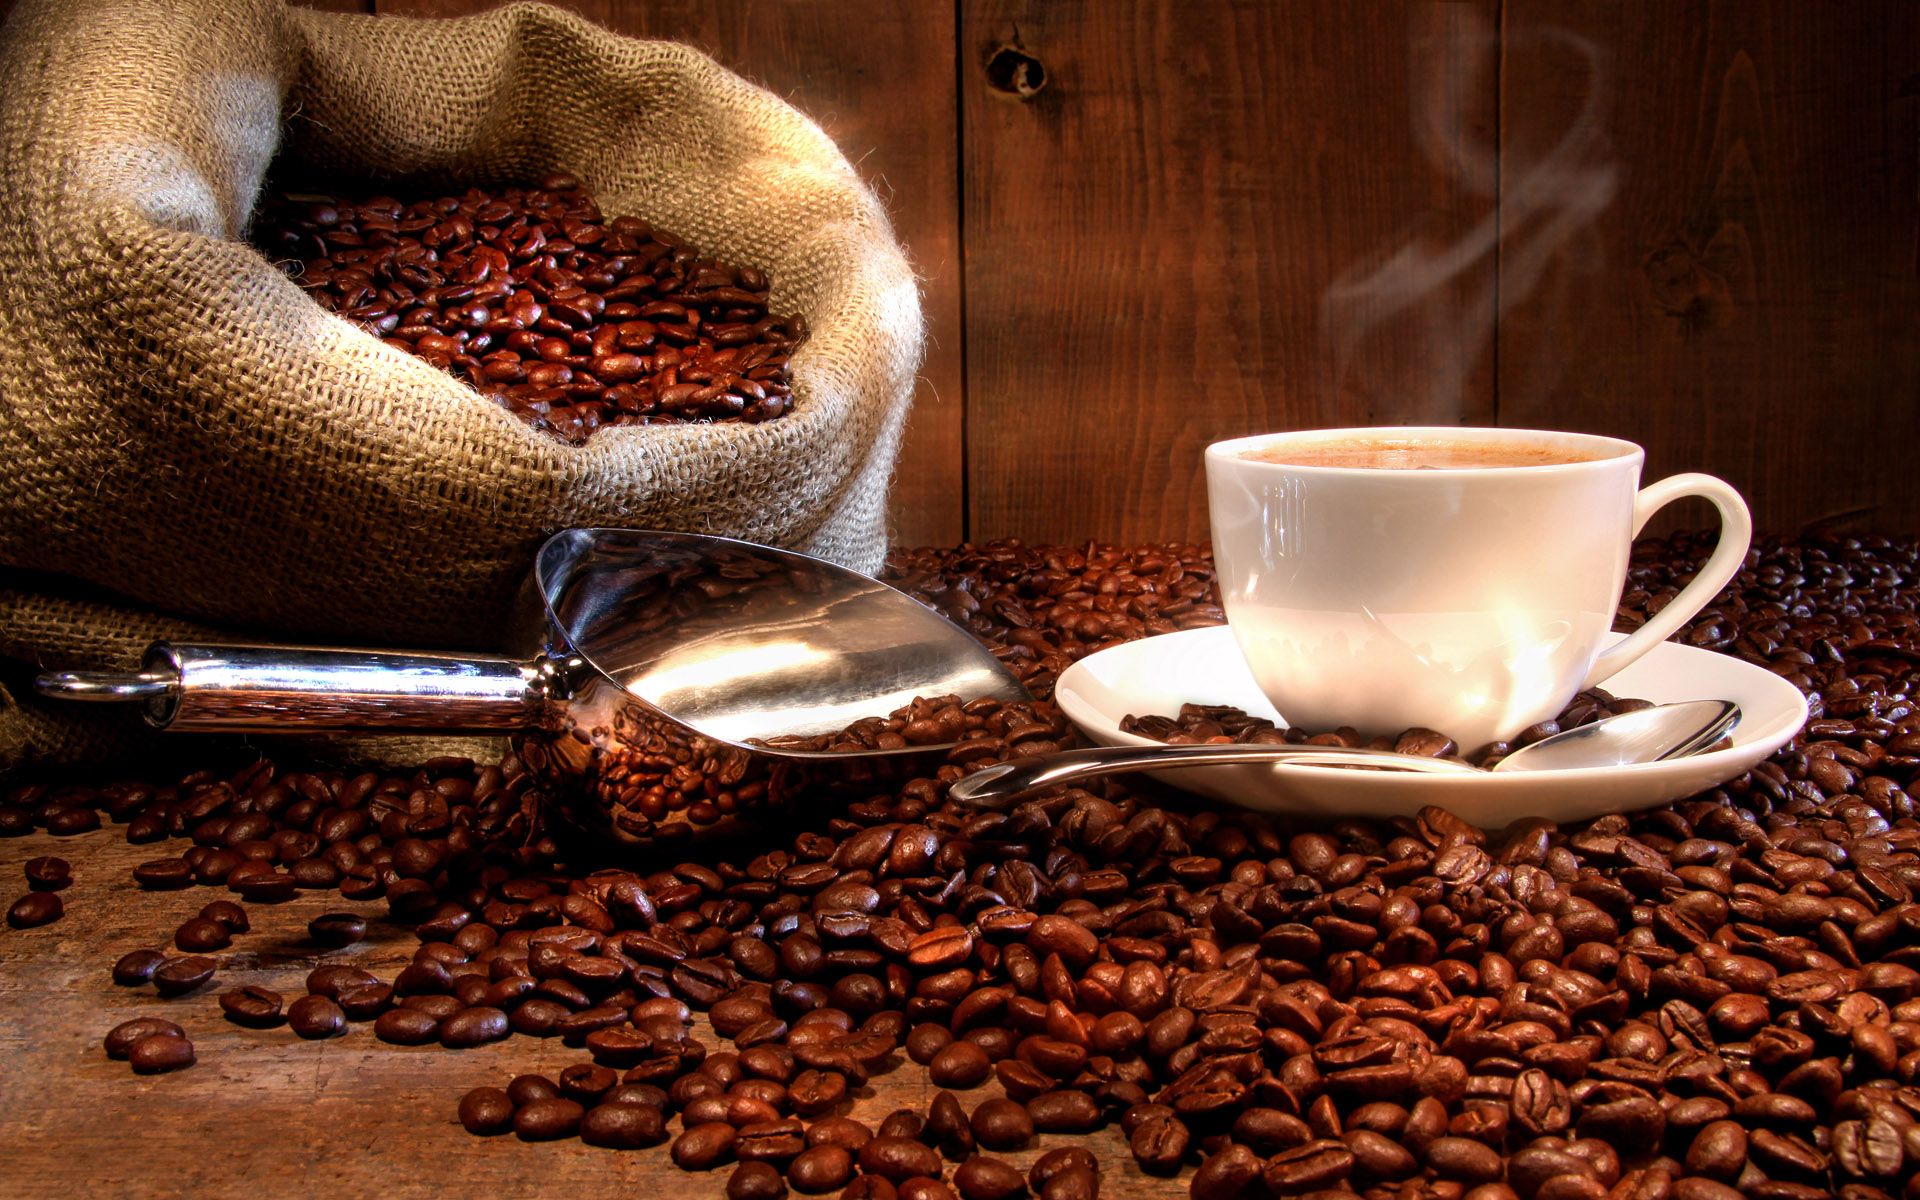 The specialty of Arabica beans. Burundian coffee beans